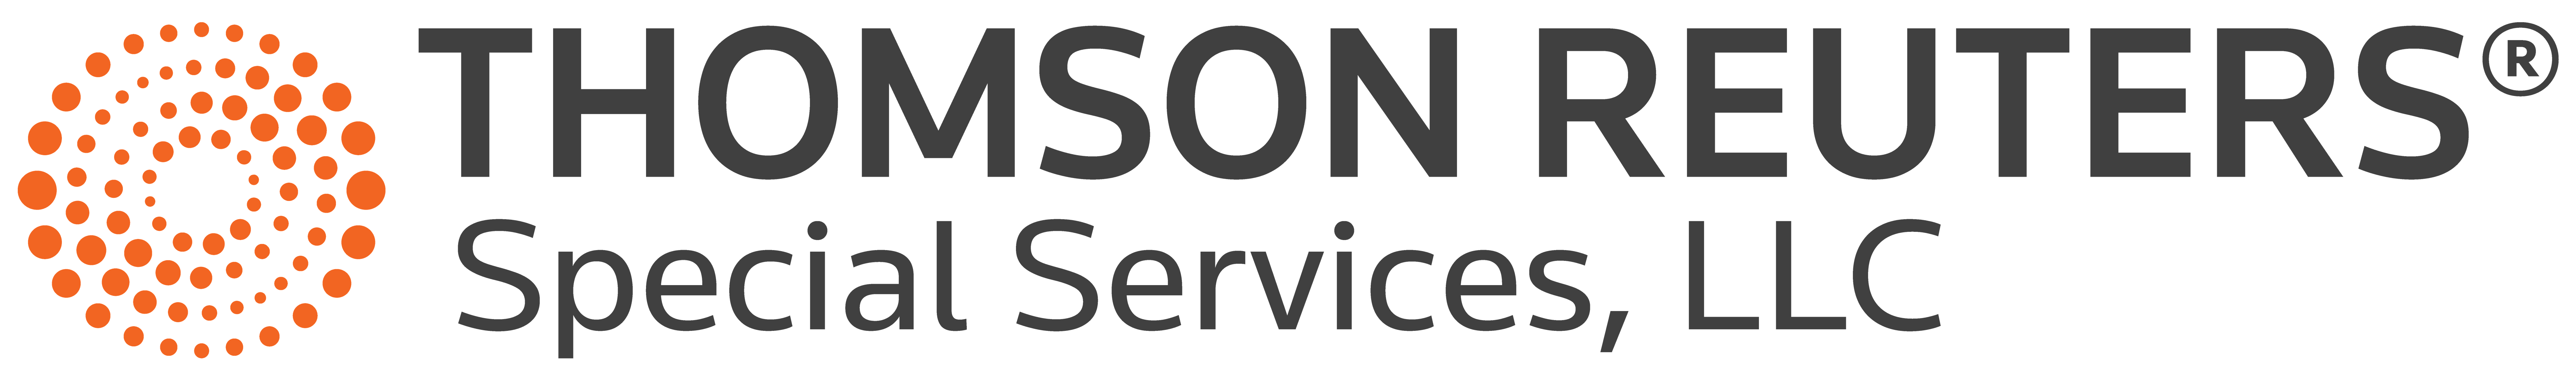 Thomson Reuters Special Services